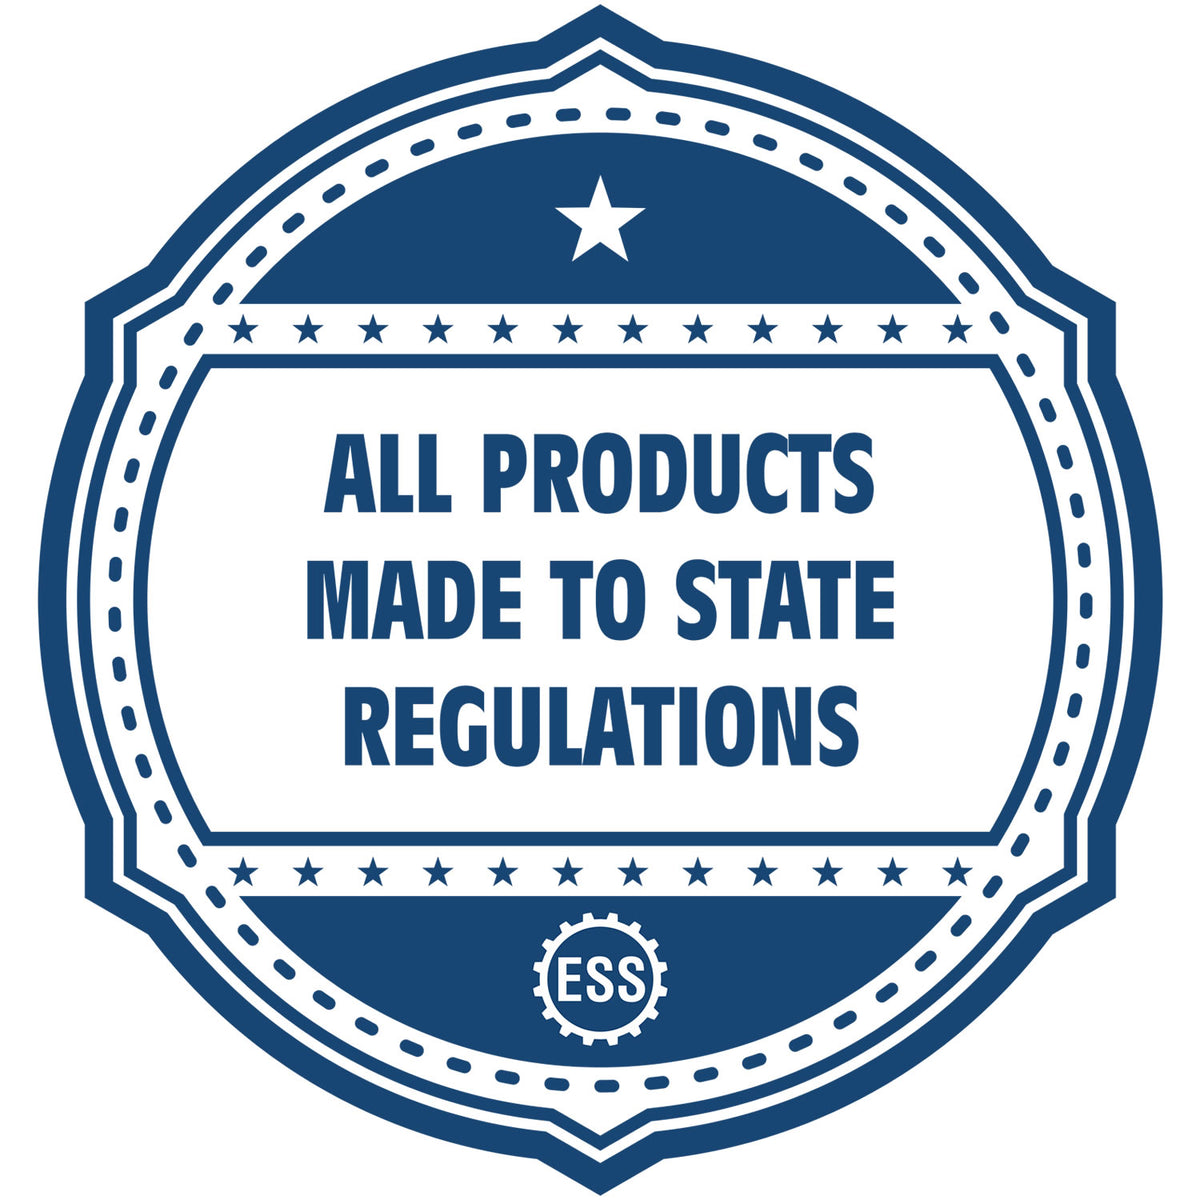 An icon or badge element for the State of Virginia Soft Land Surveyor Embossing Seal showing that this product is made in compliance with state regulations.